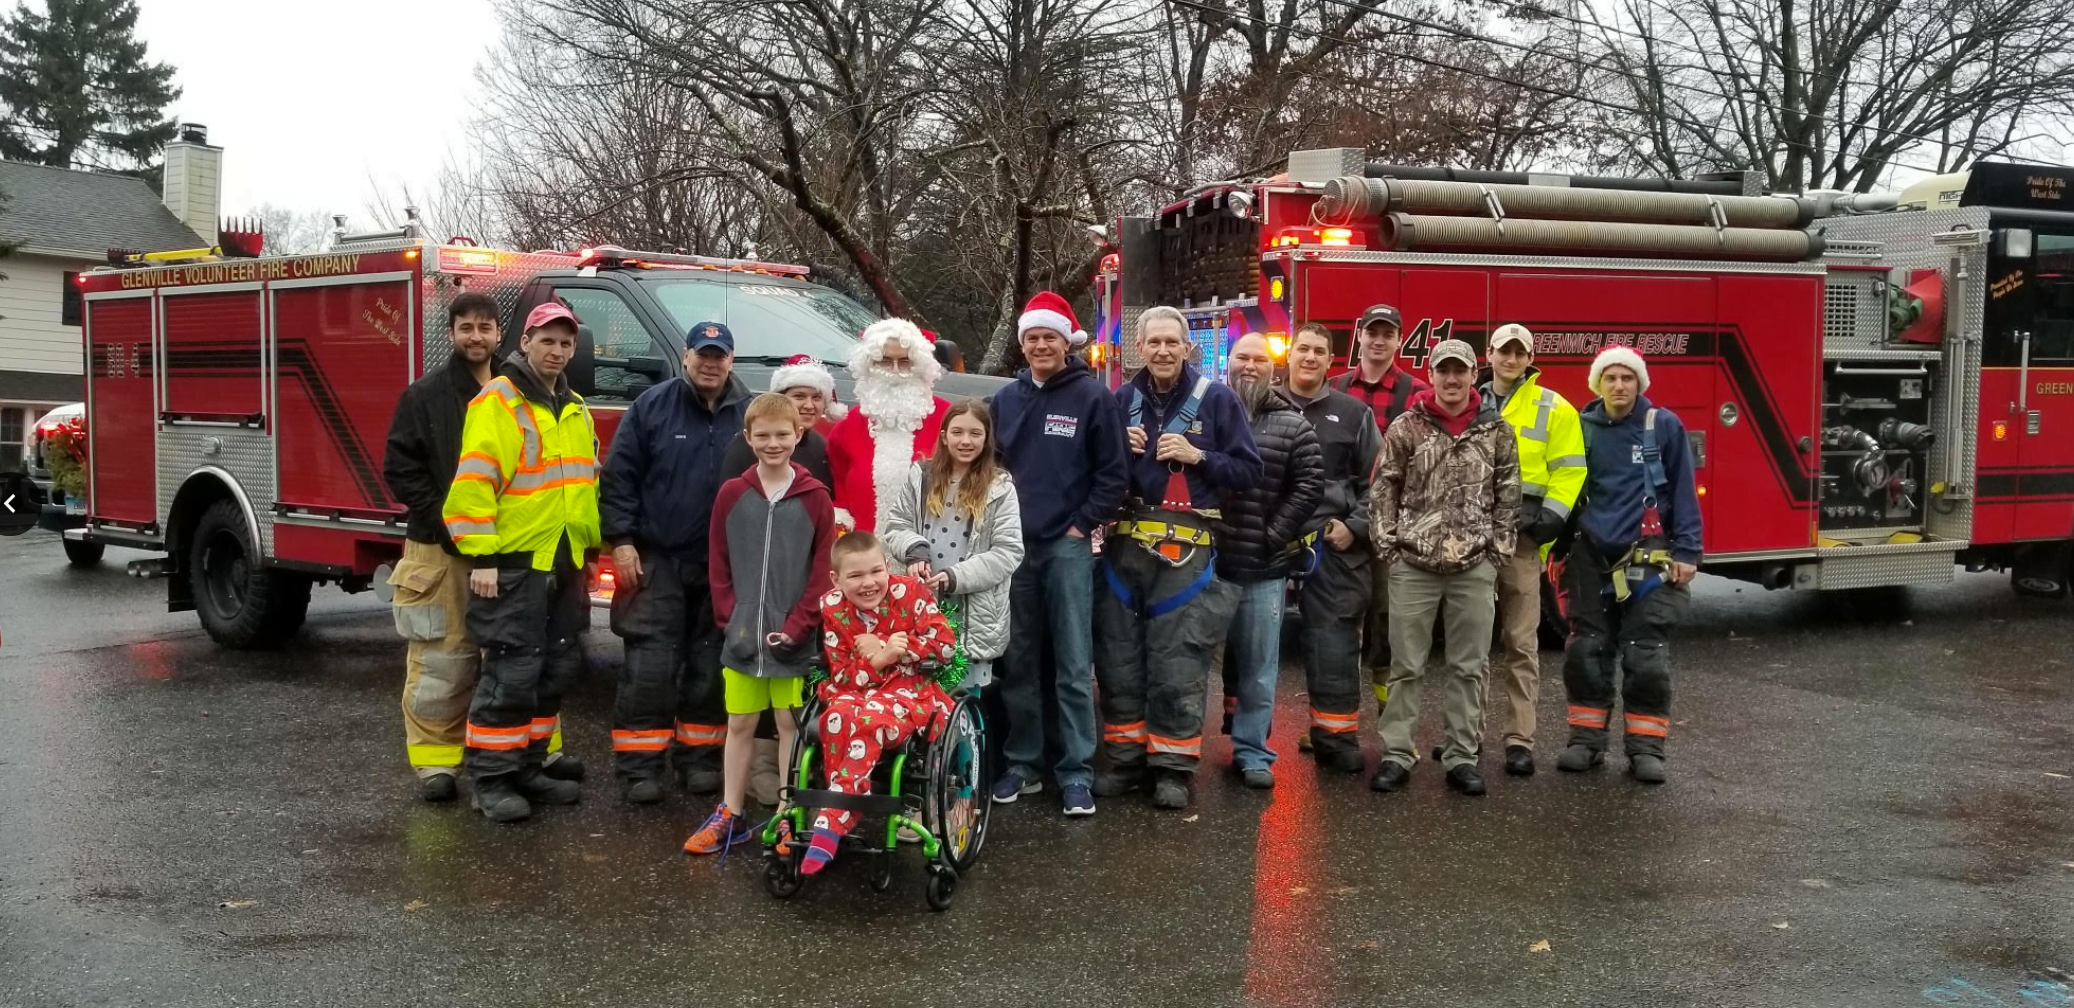 Glenville Volunteer Fire Dept visited families in the community in full uniform along with Santa, music and candy canes. Dec 16, 2018 Photo: Heather Brown Lowthert